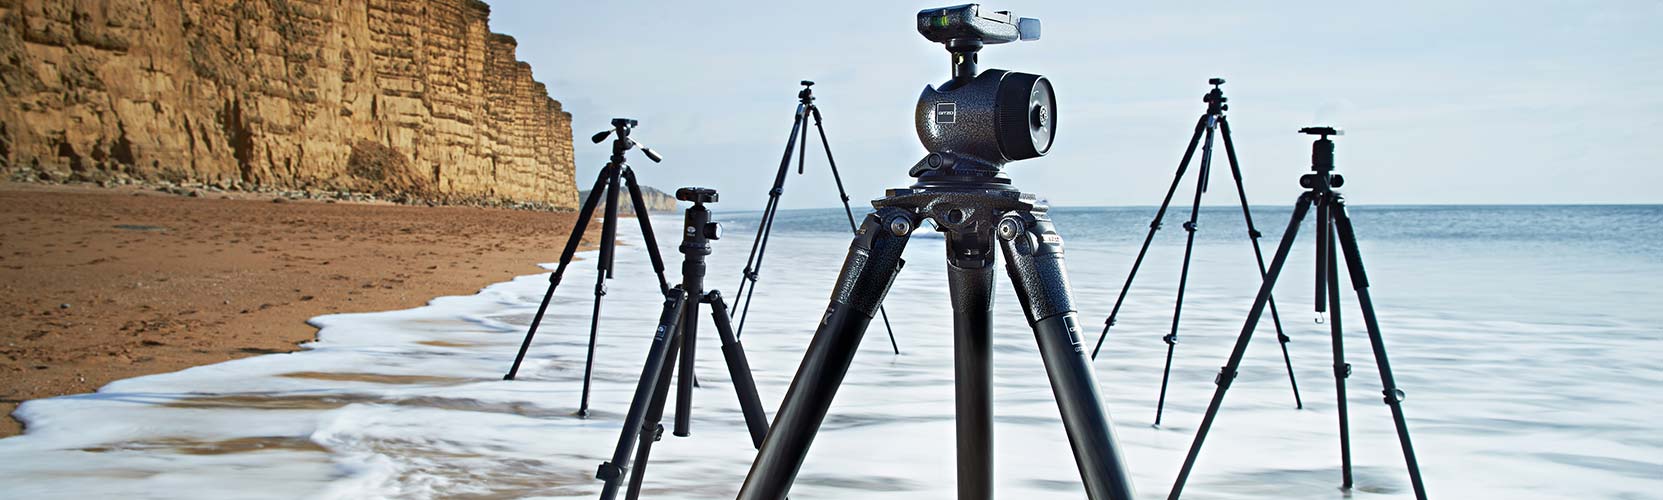 5 Reasons To Use a Tripod For Your Camera